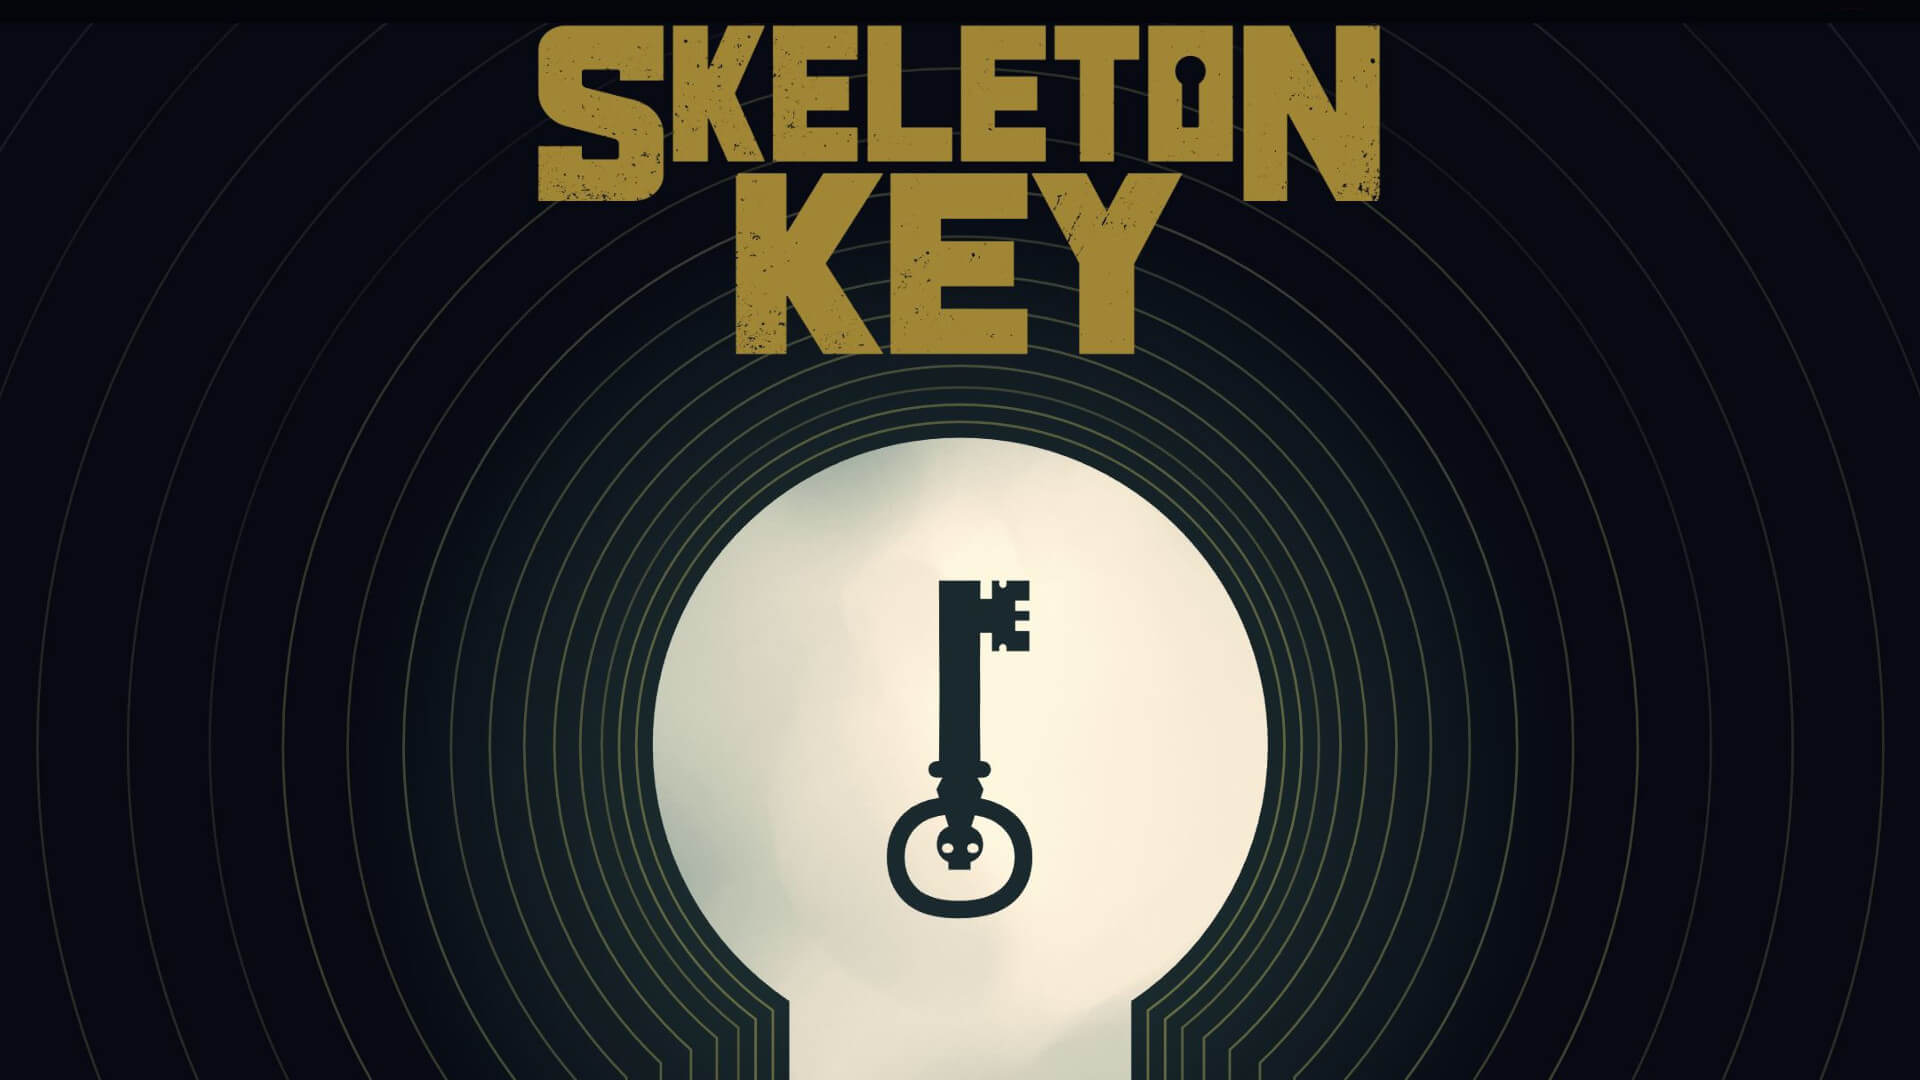 The logo for Skeleton Key, a new Wizards of the Coast studio